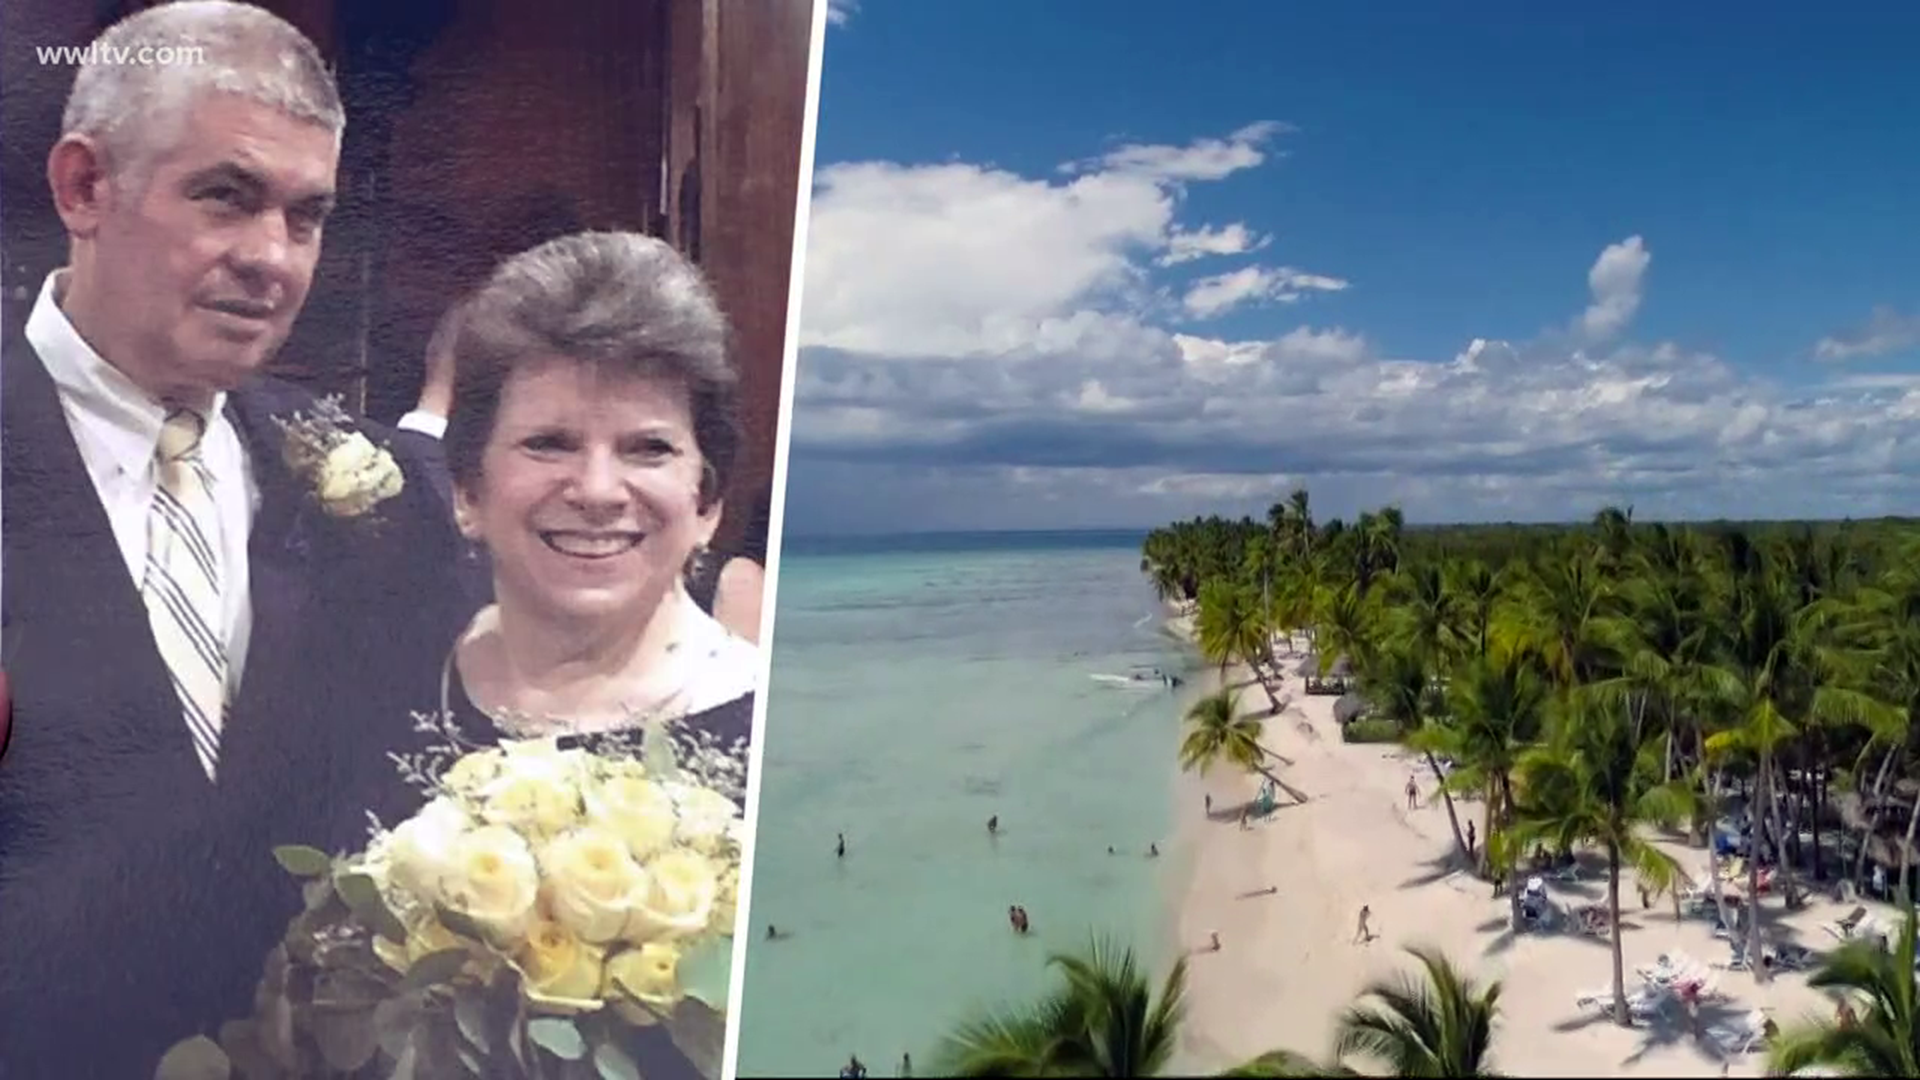 Susan Simoneaux's death may not be related to the mysterious deaths in the Dominican Republic, but given the recent news, the family is concerned about that possibility.